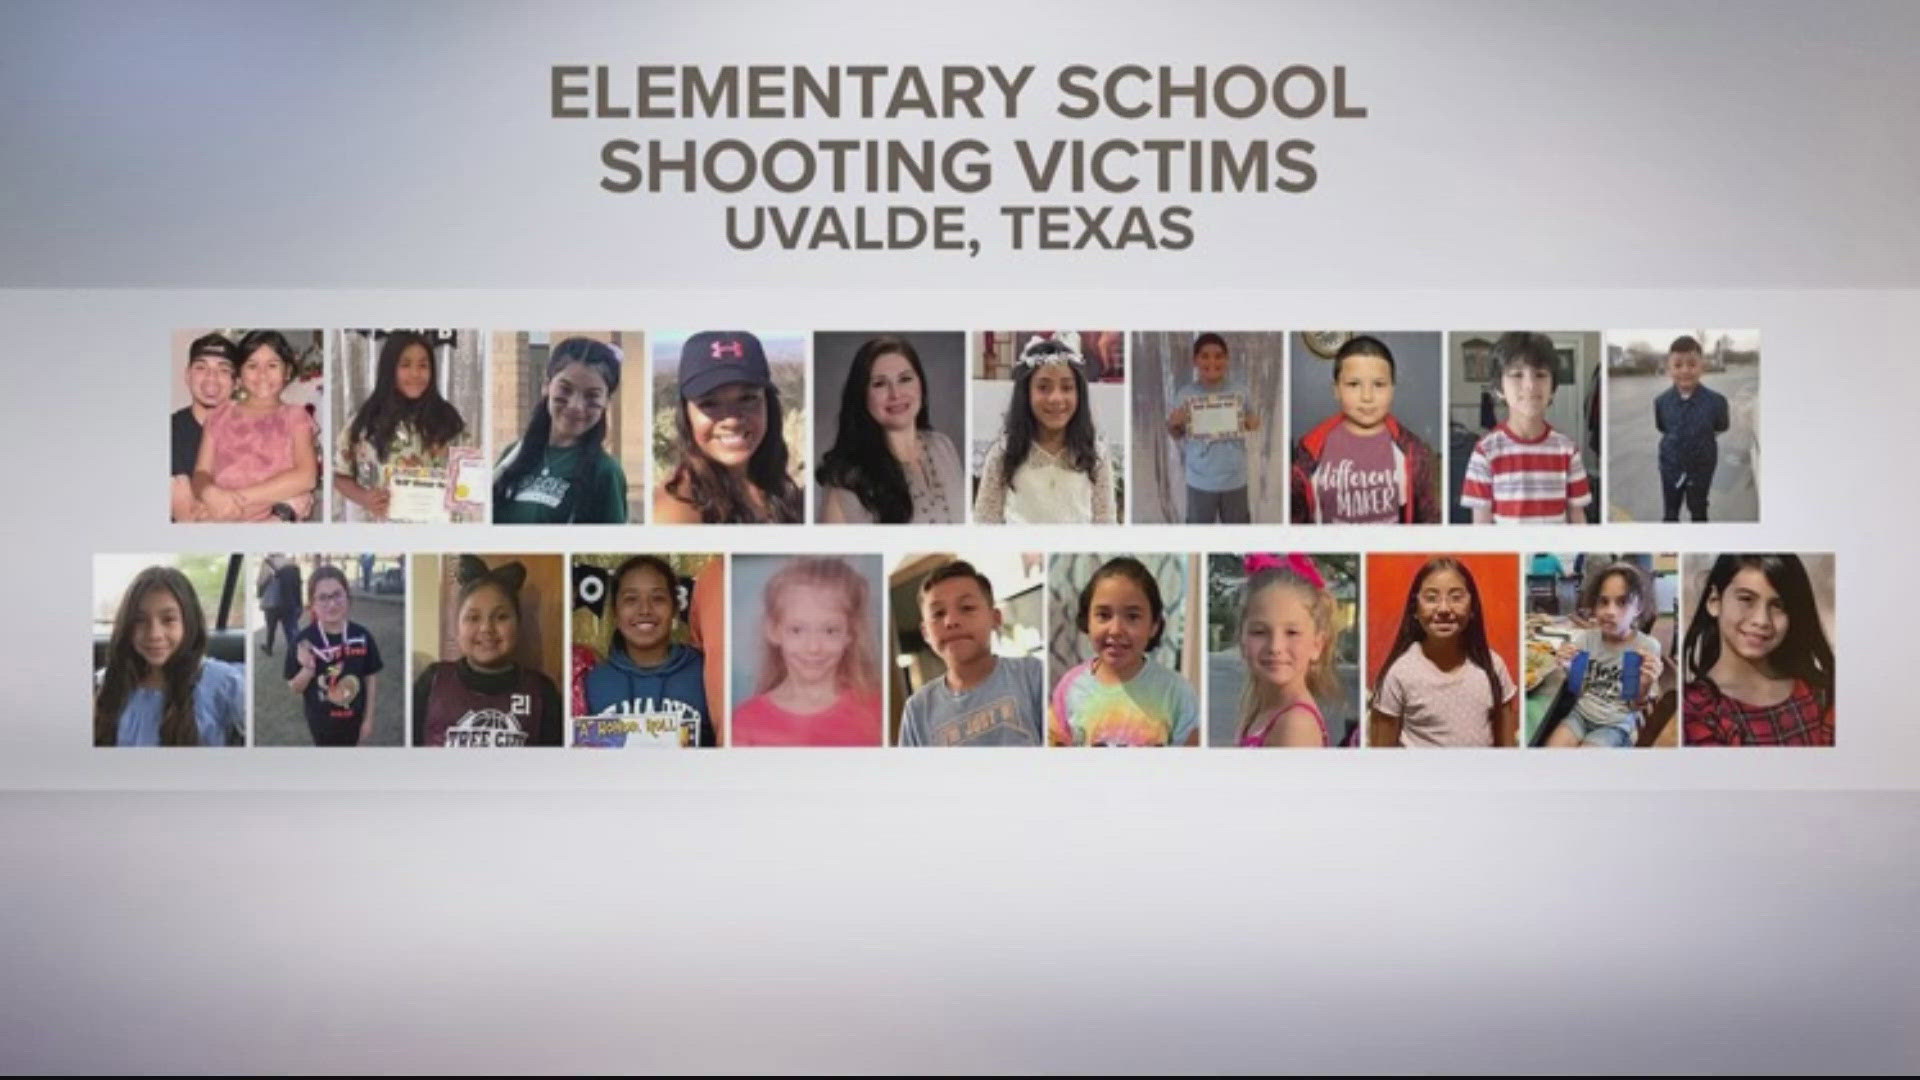 On May 24, 2022, a gunman killed 19 students and two teachers inside Robb Elementary School in Uvalde.